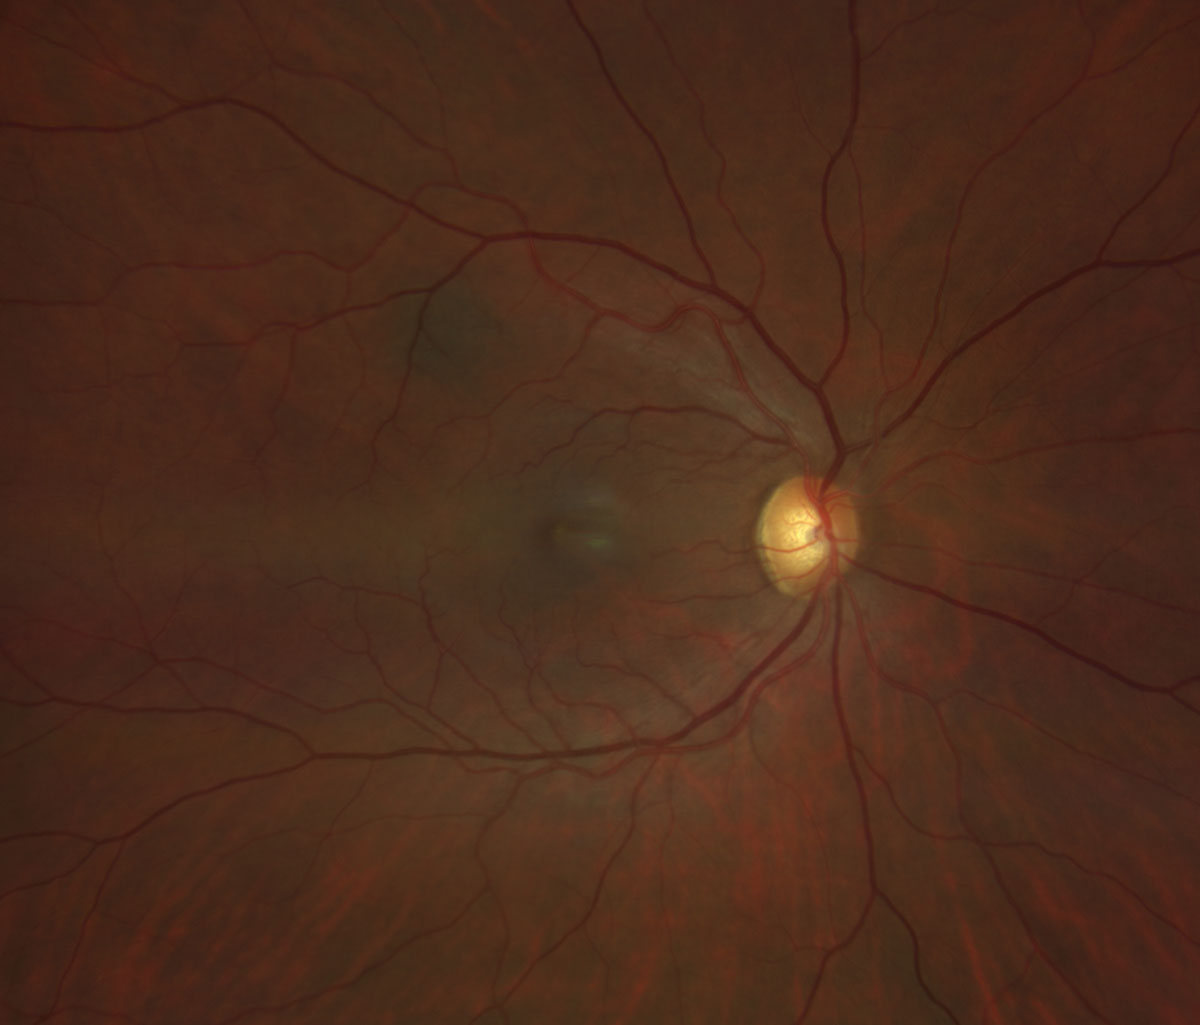 Fig. 3. Zeiss Clarus fundus photo of the right eye.